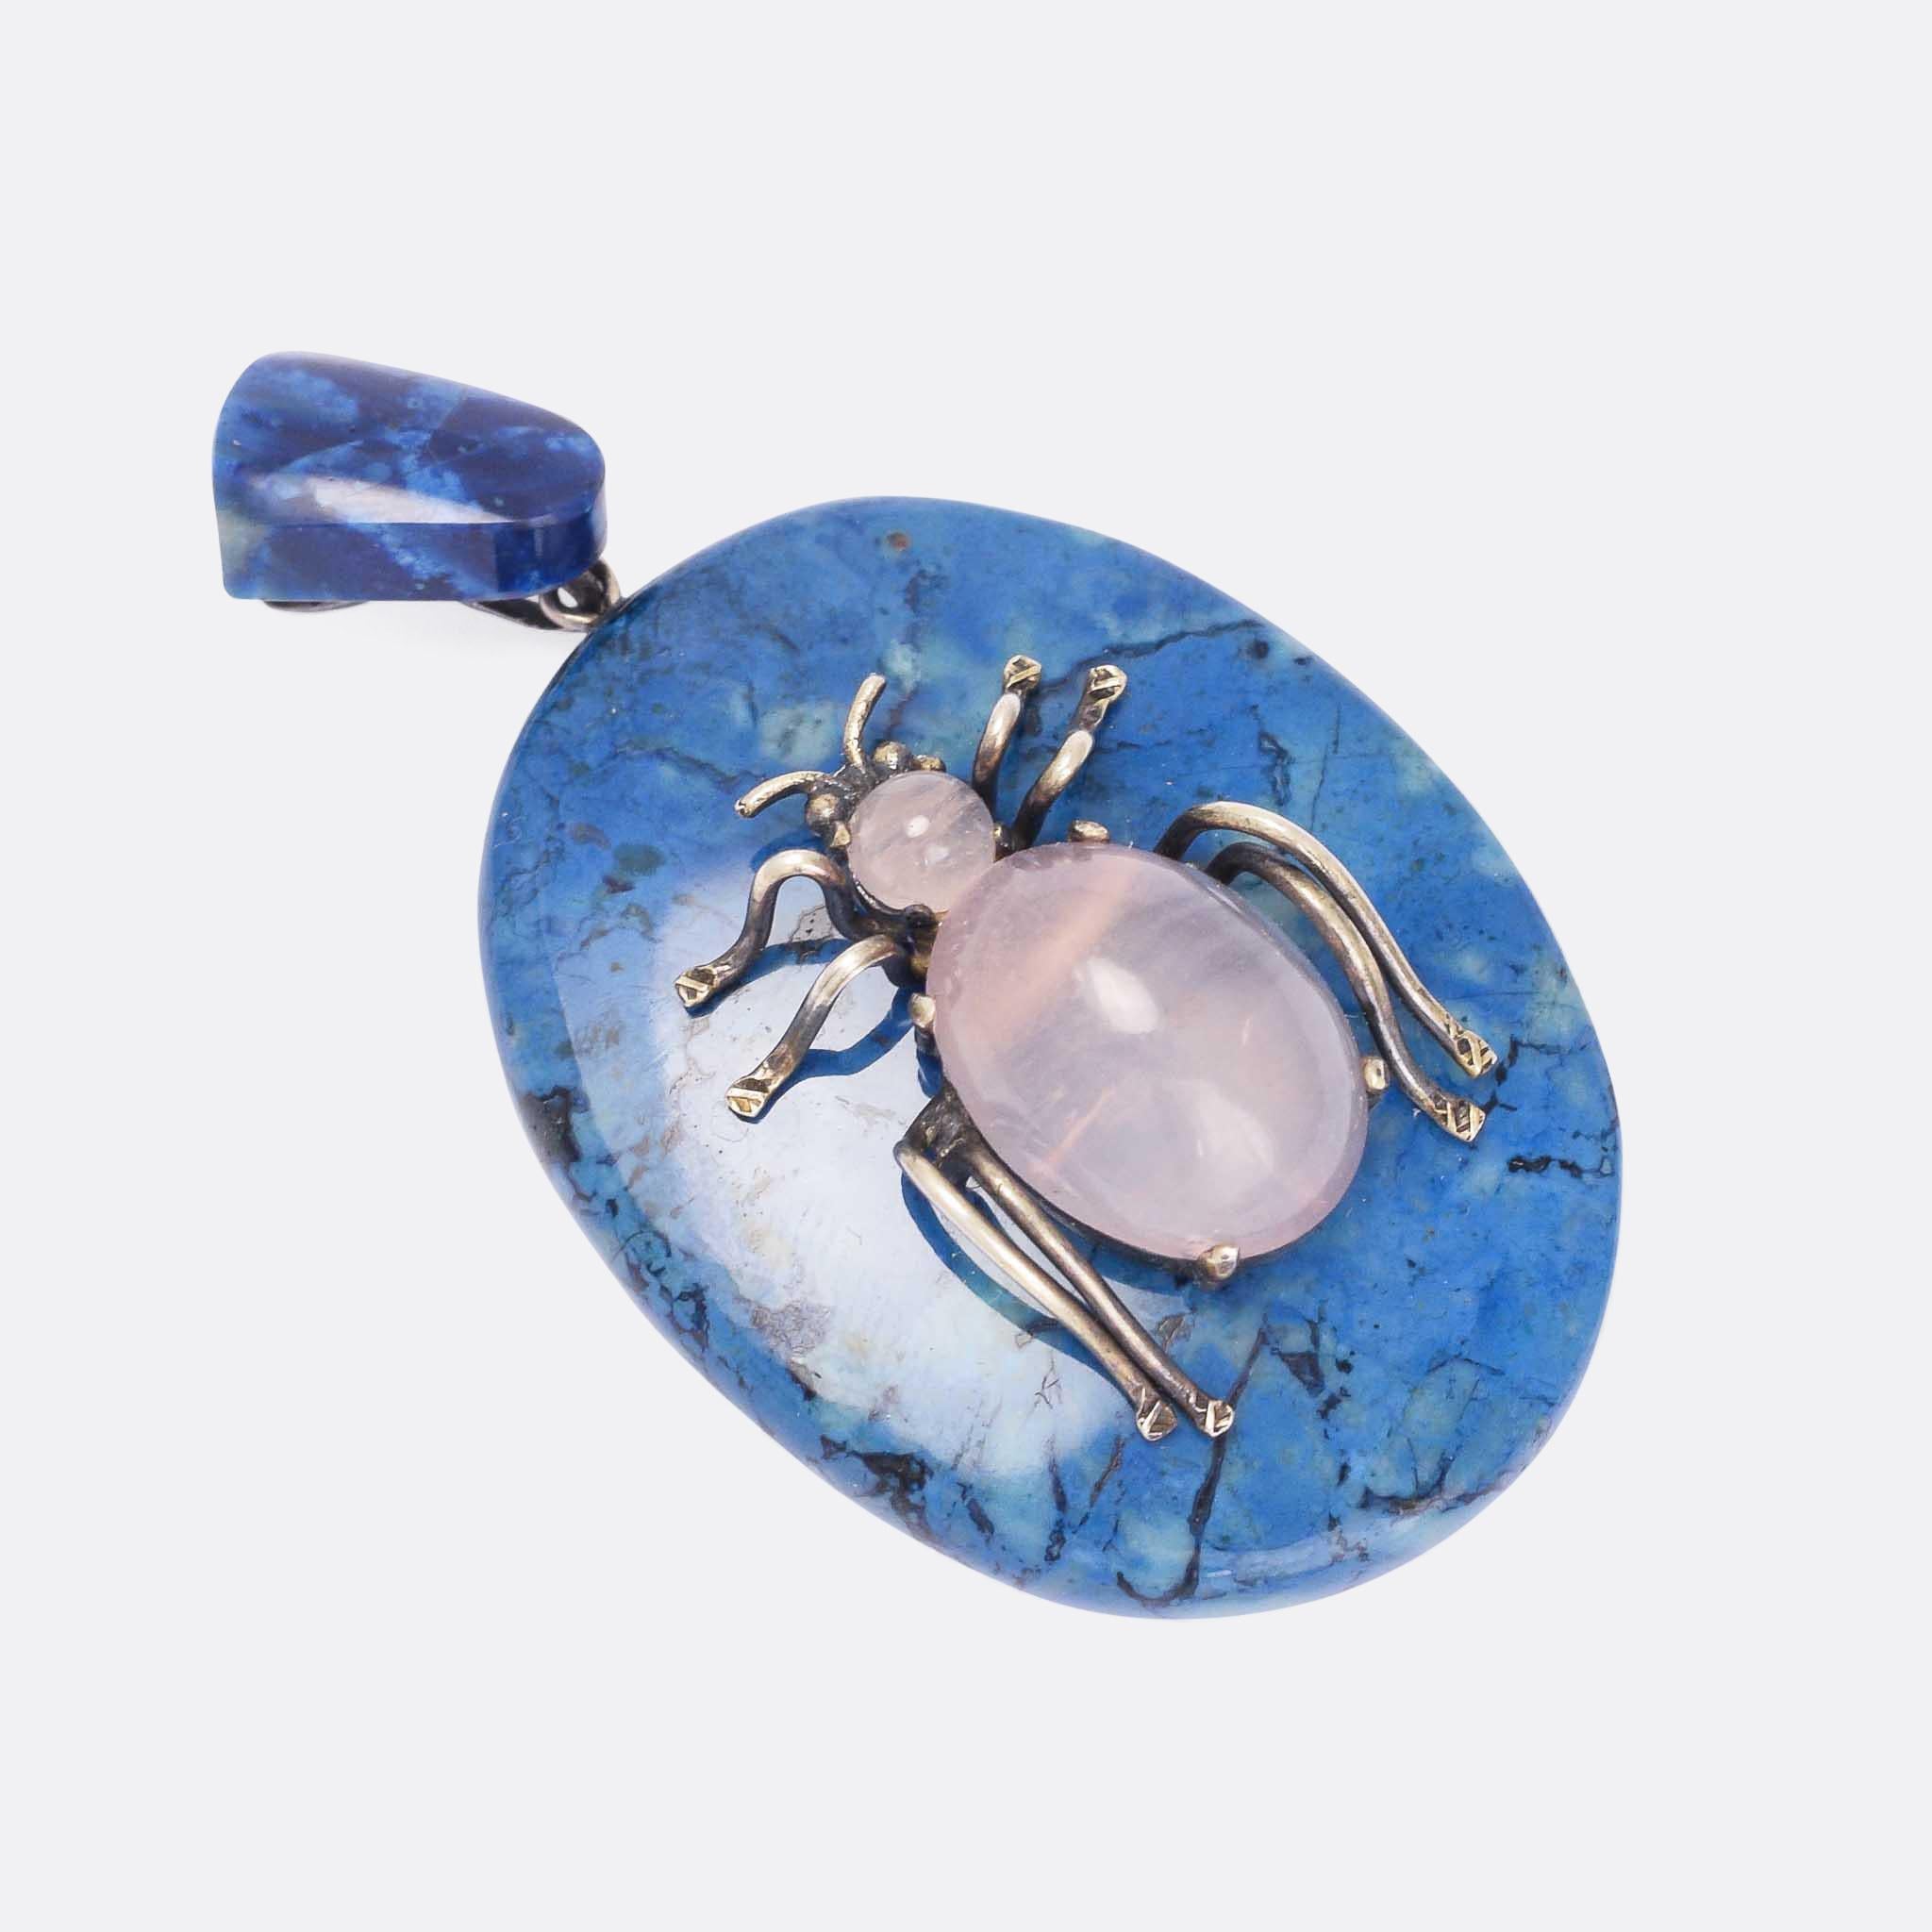 A beautiful antique bug pendant dating from the late Victorian era. The bug itself is set with rose quartz and has silver legs and antennae, and is rests on an oval lozenge of Swiss lapis - complete with matched bail. It's a good big size and